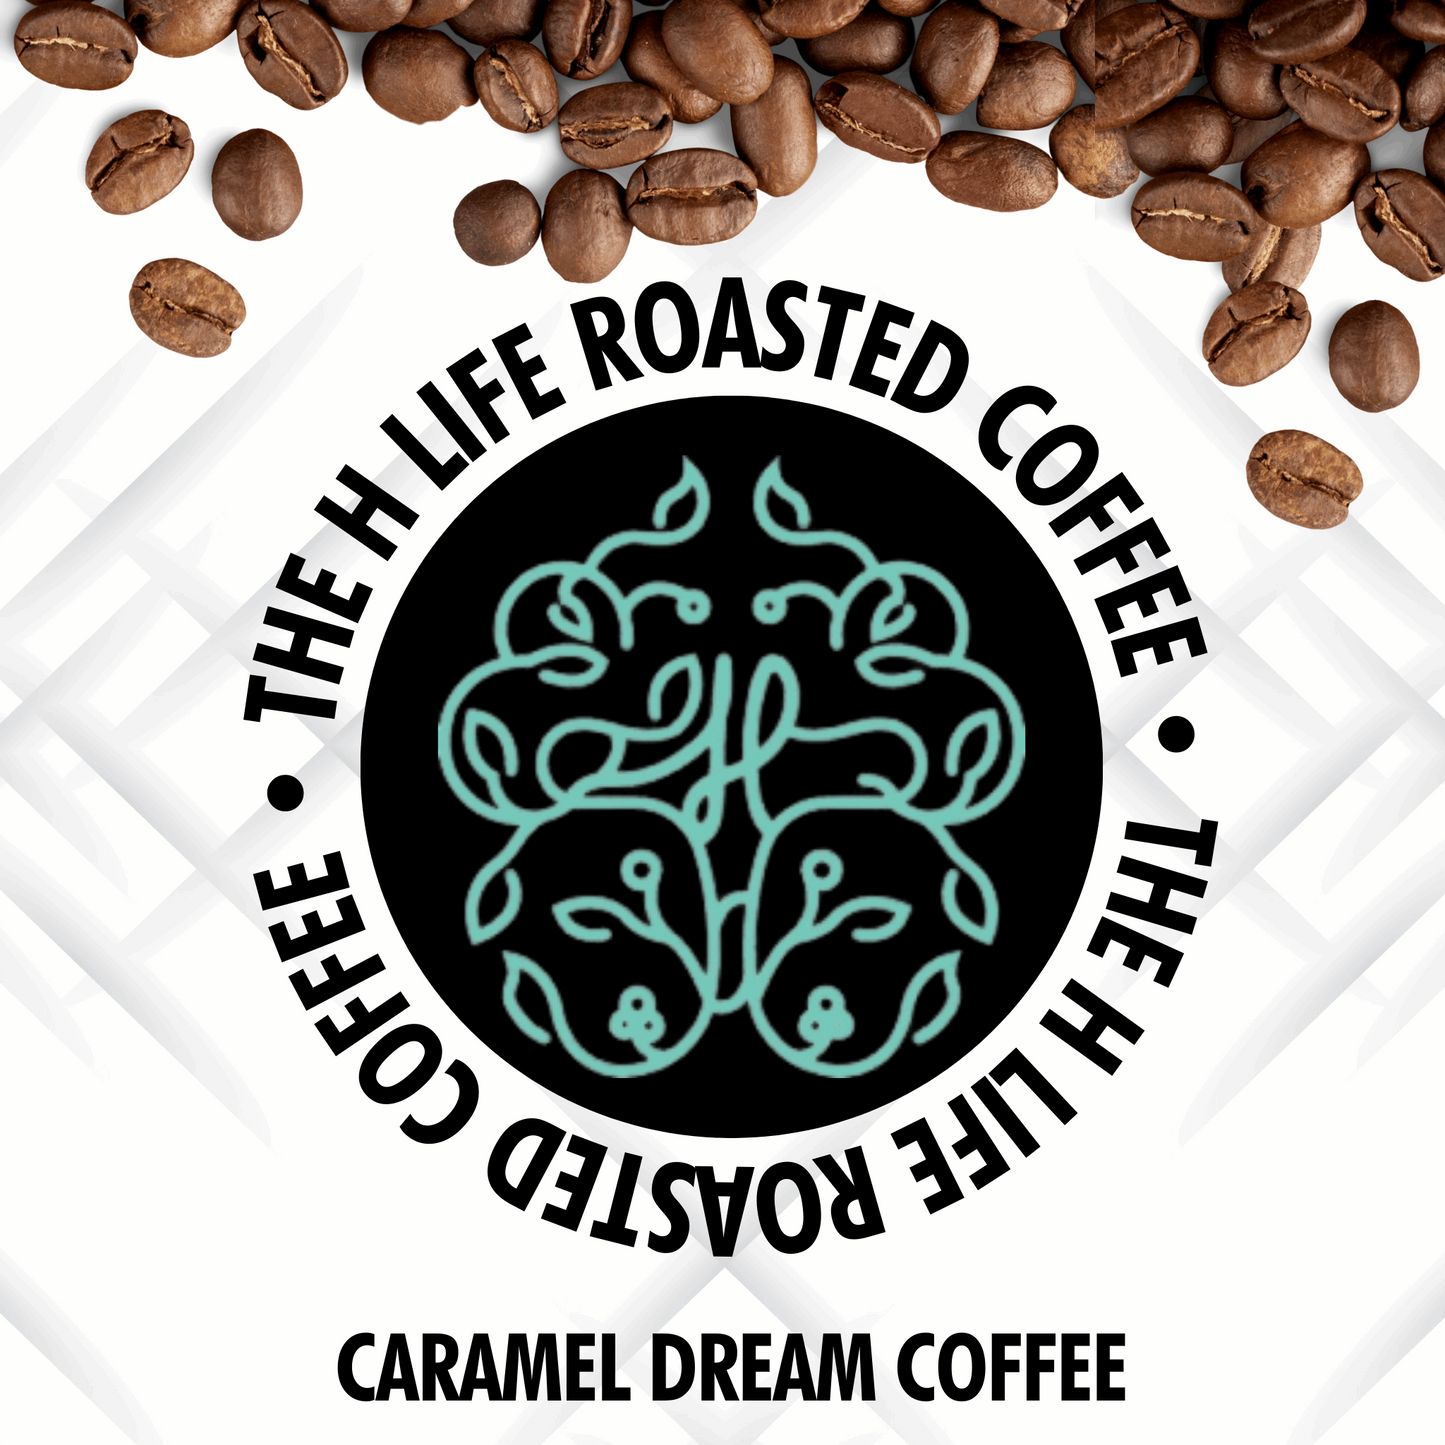 On a white textured background there are coffee beans spilling from the top and The H Life brain logo in the center. The H Life Roasted Coffee lineup highlighting the Caramel Dream Coffee product.